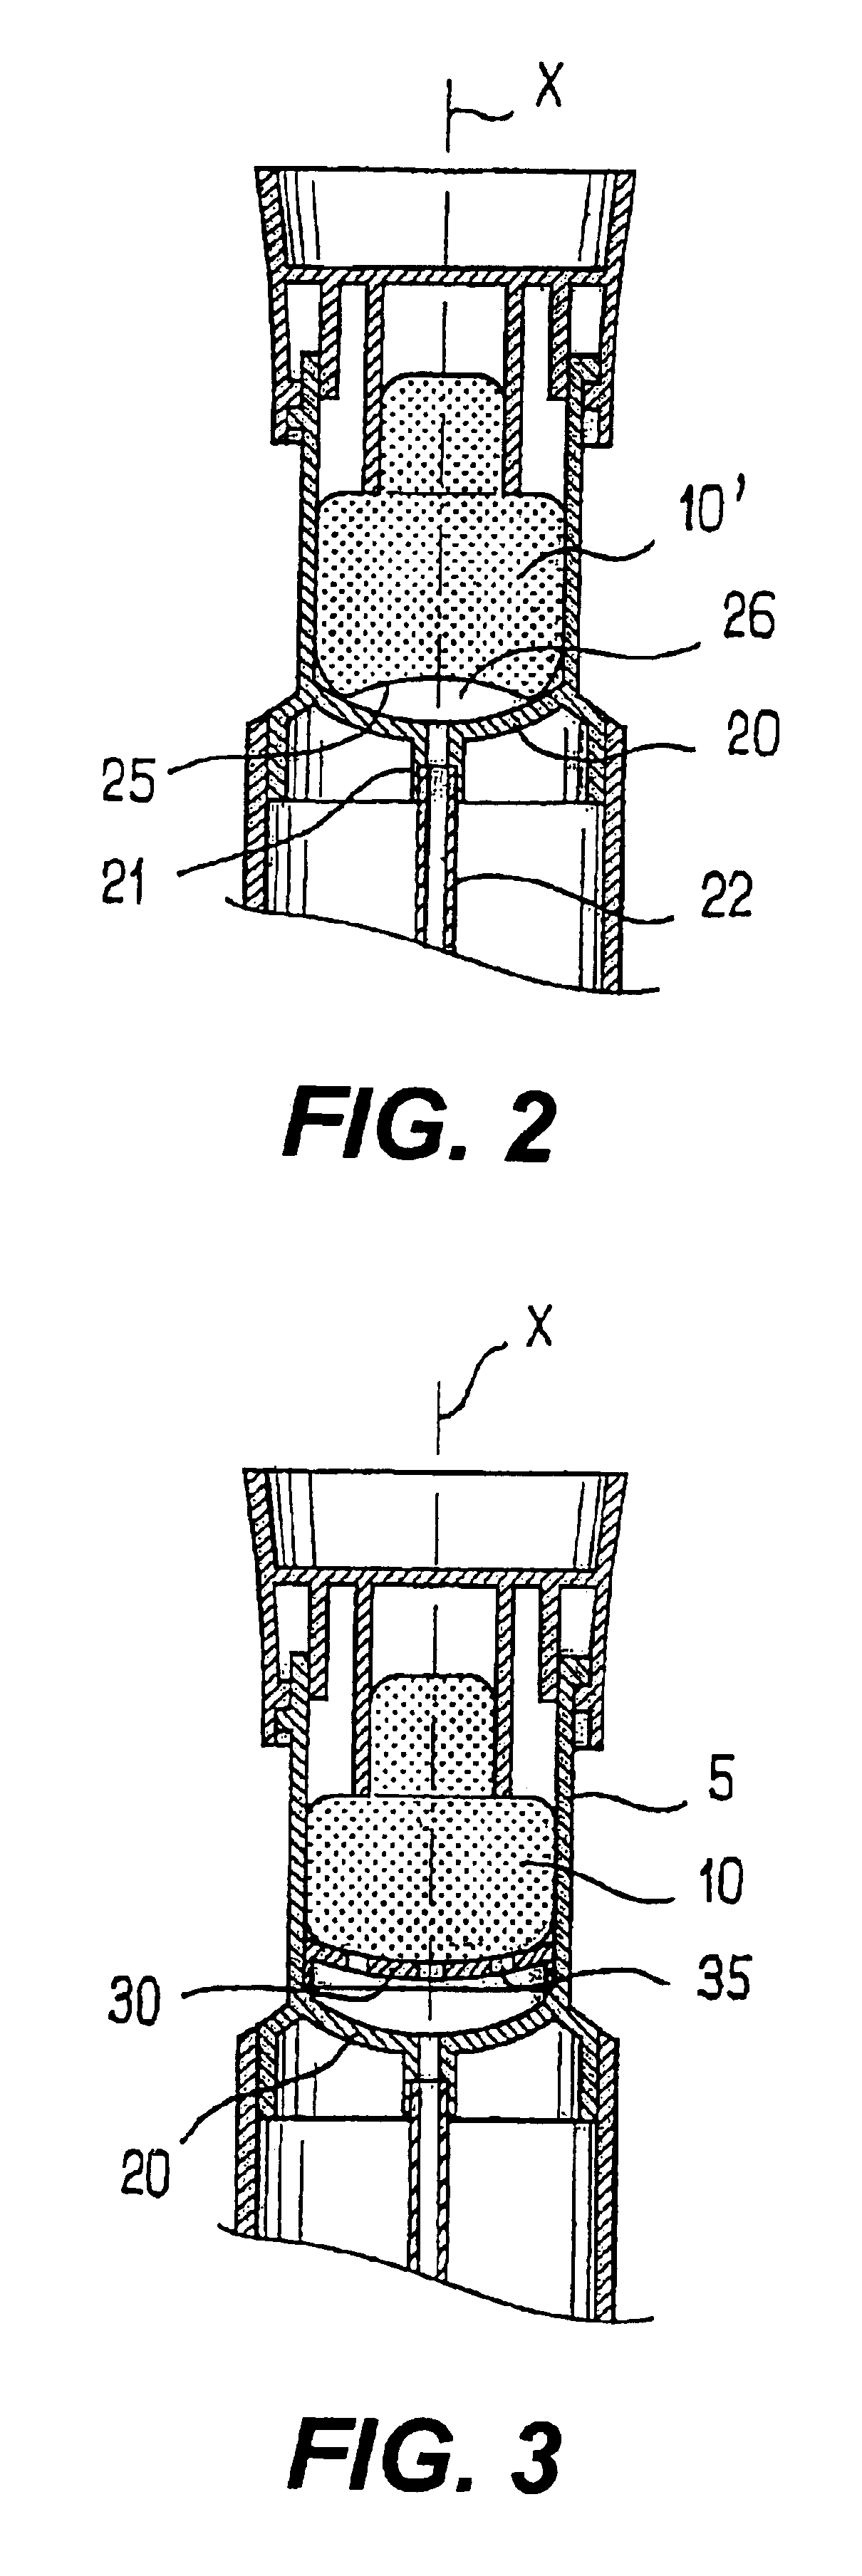 Product application device including a dip tube